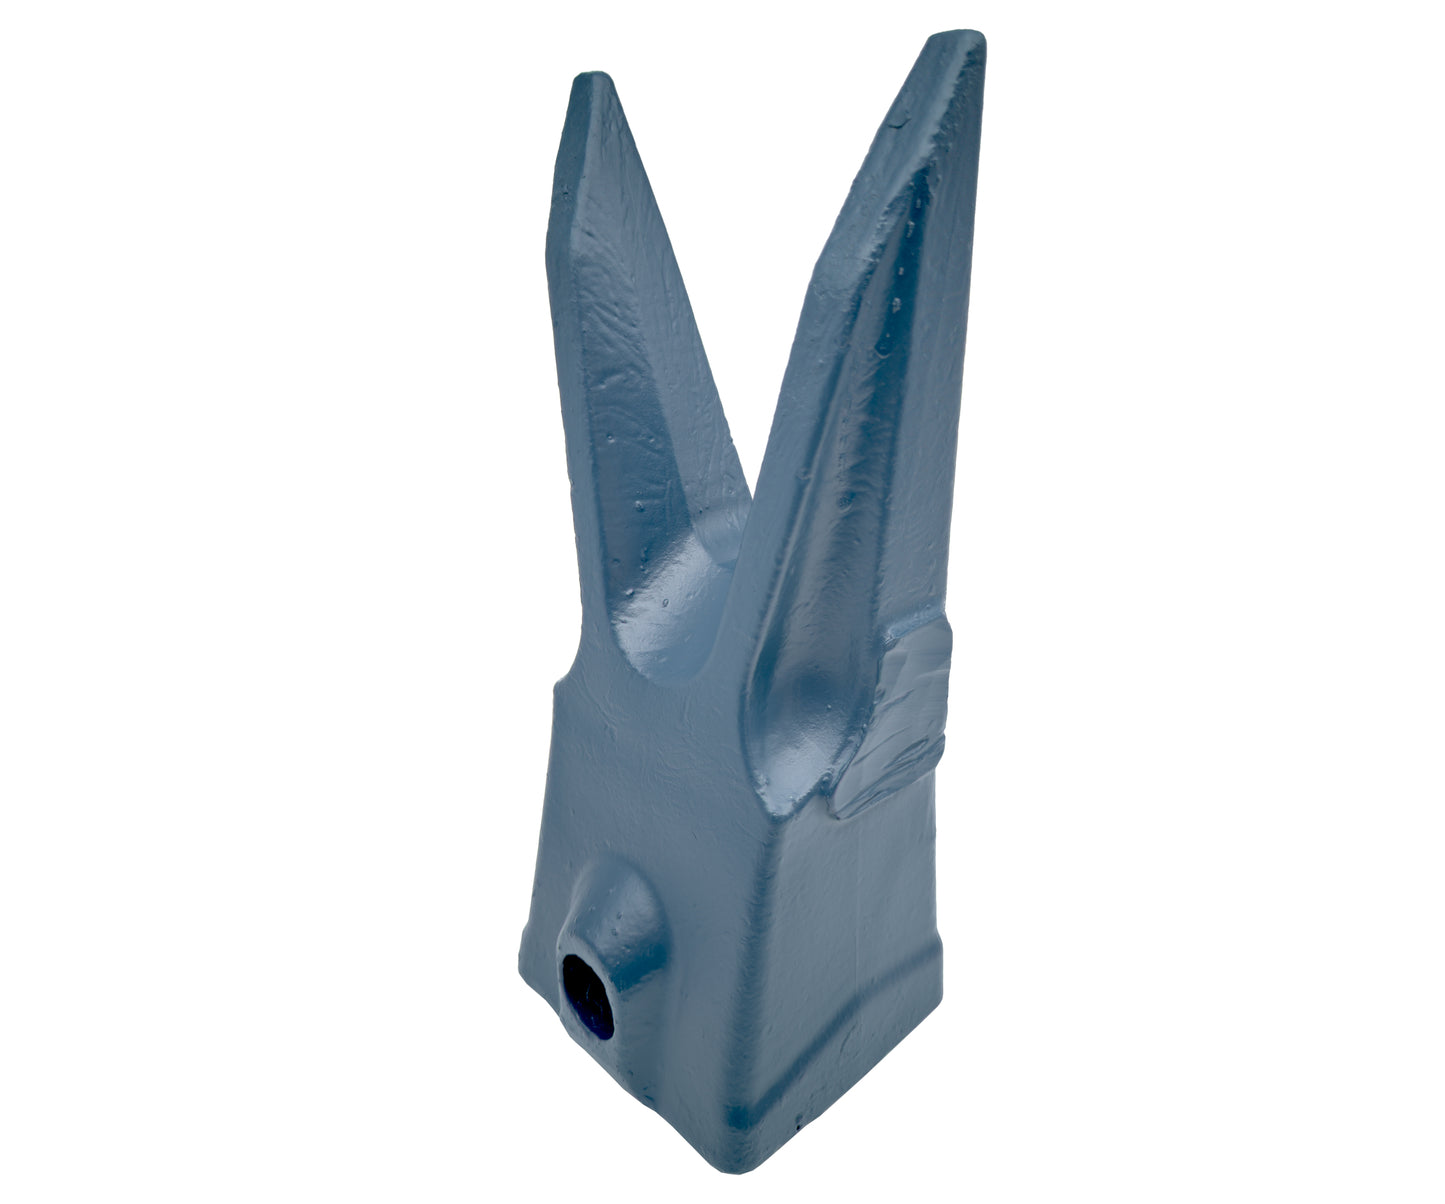 X385WT Twin Tiger Rock Tooth - 'Hensley X385 Style' for Excavator Buckets